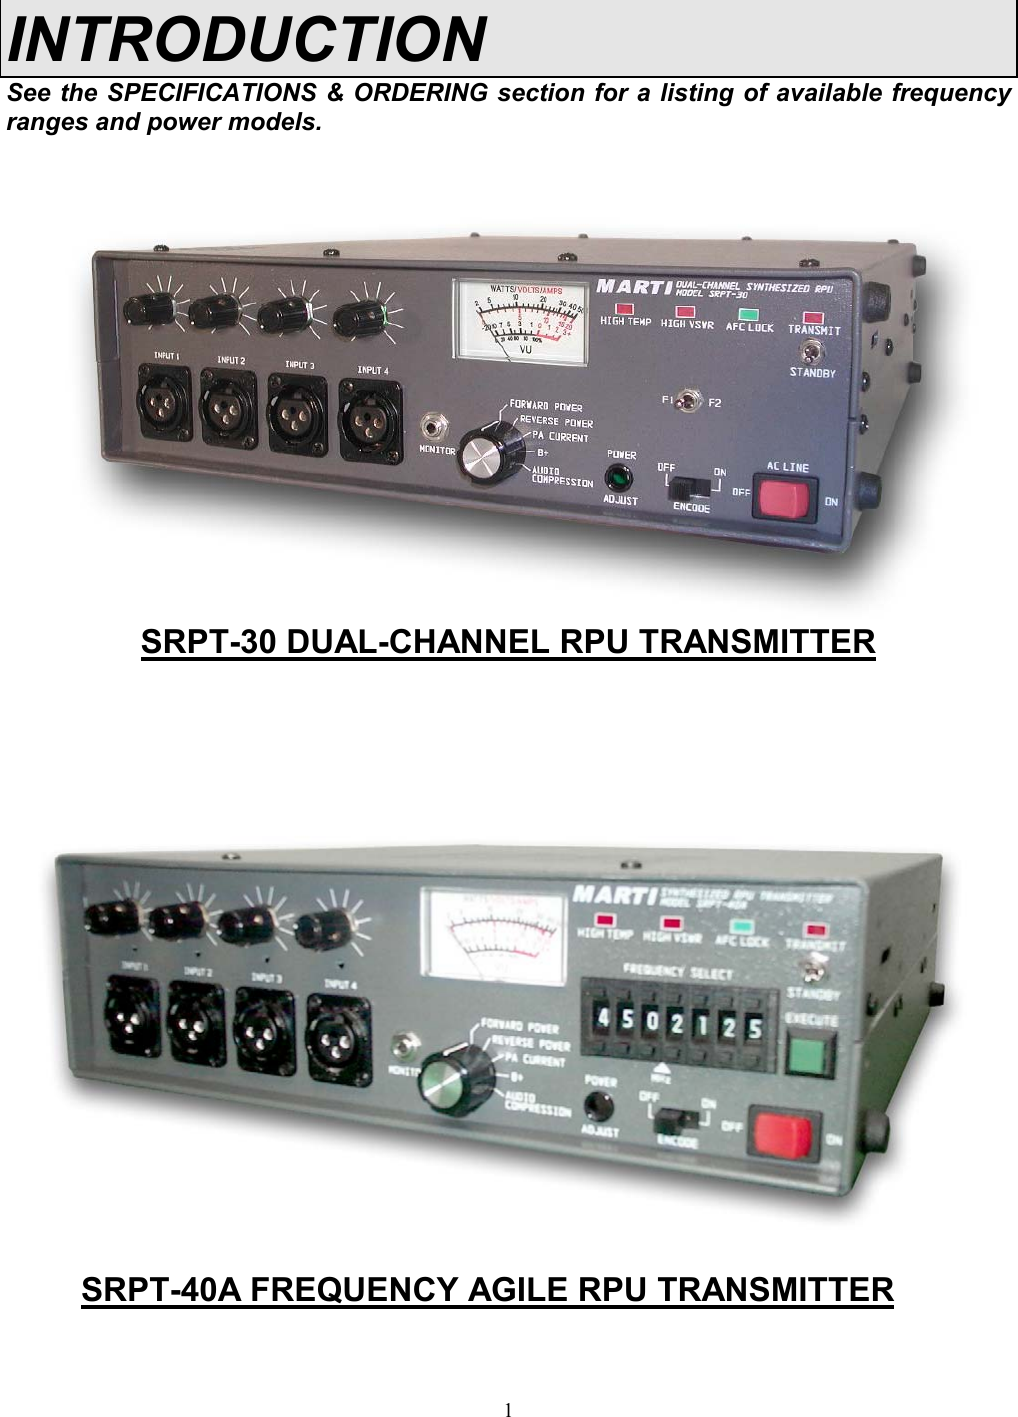 1INTRODUCTIONSee the SPECIFICATIONS &amp; ORDERING section for a listing of available frequencyranges and power models.SRPT-30 DUAL-CHANNEL RPU TRANSMITTERSRPT-40A FREQUENCY AGILE RPU TRANSMITTER